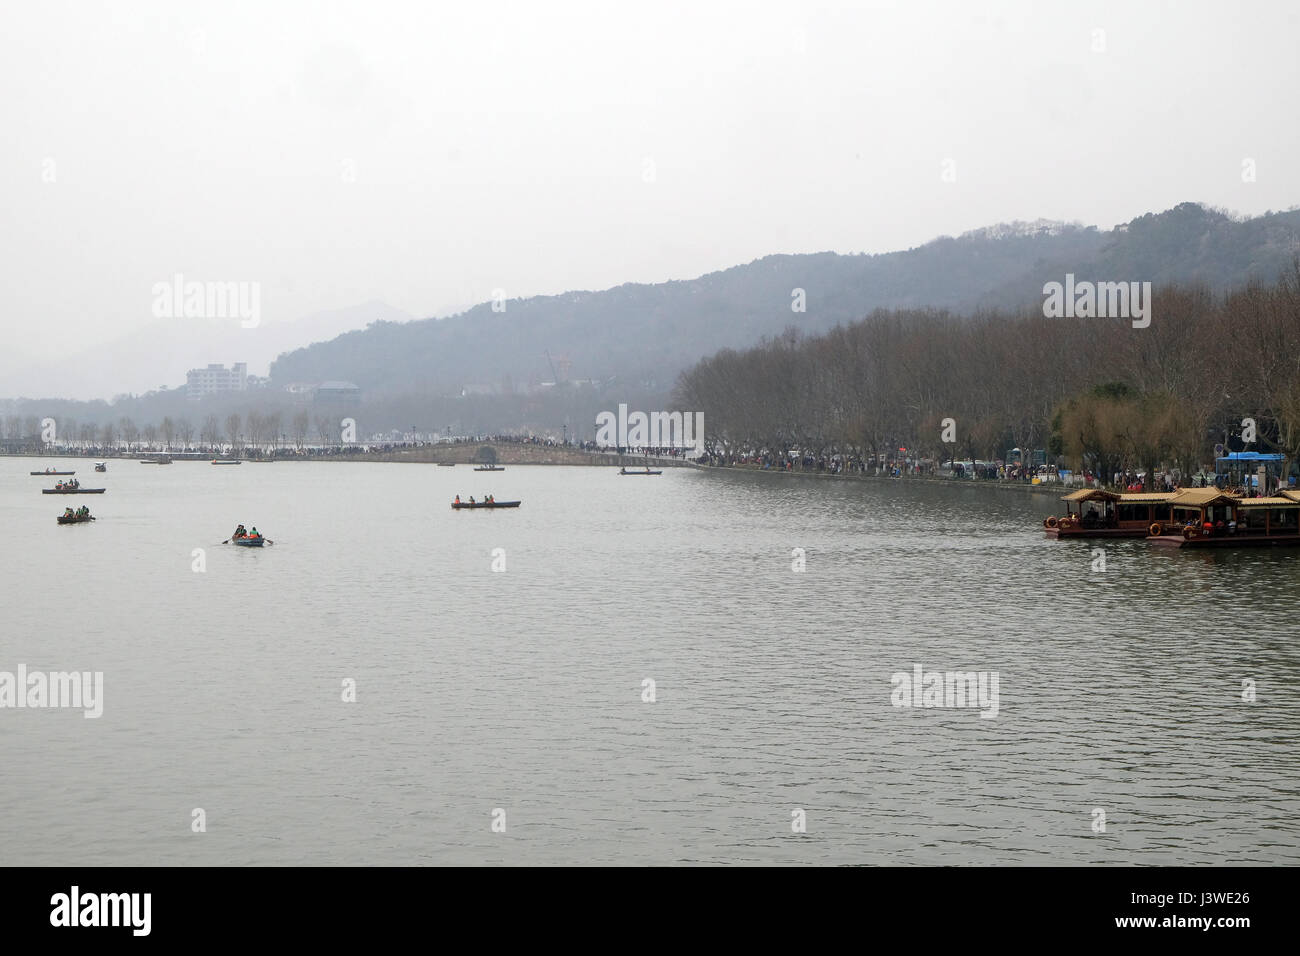 People are moving in boats on West lake in Hangzhou, China, February 21, 2016. Stock Photo